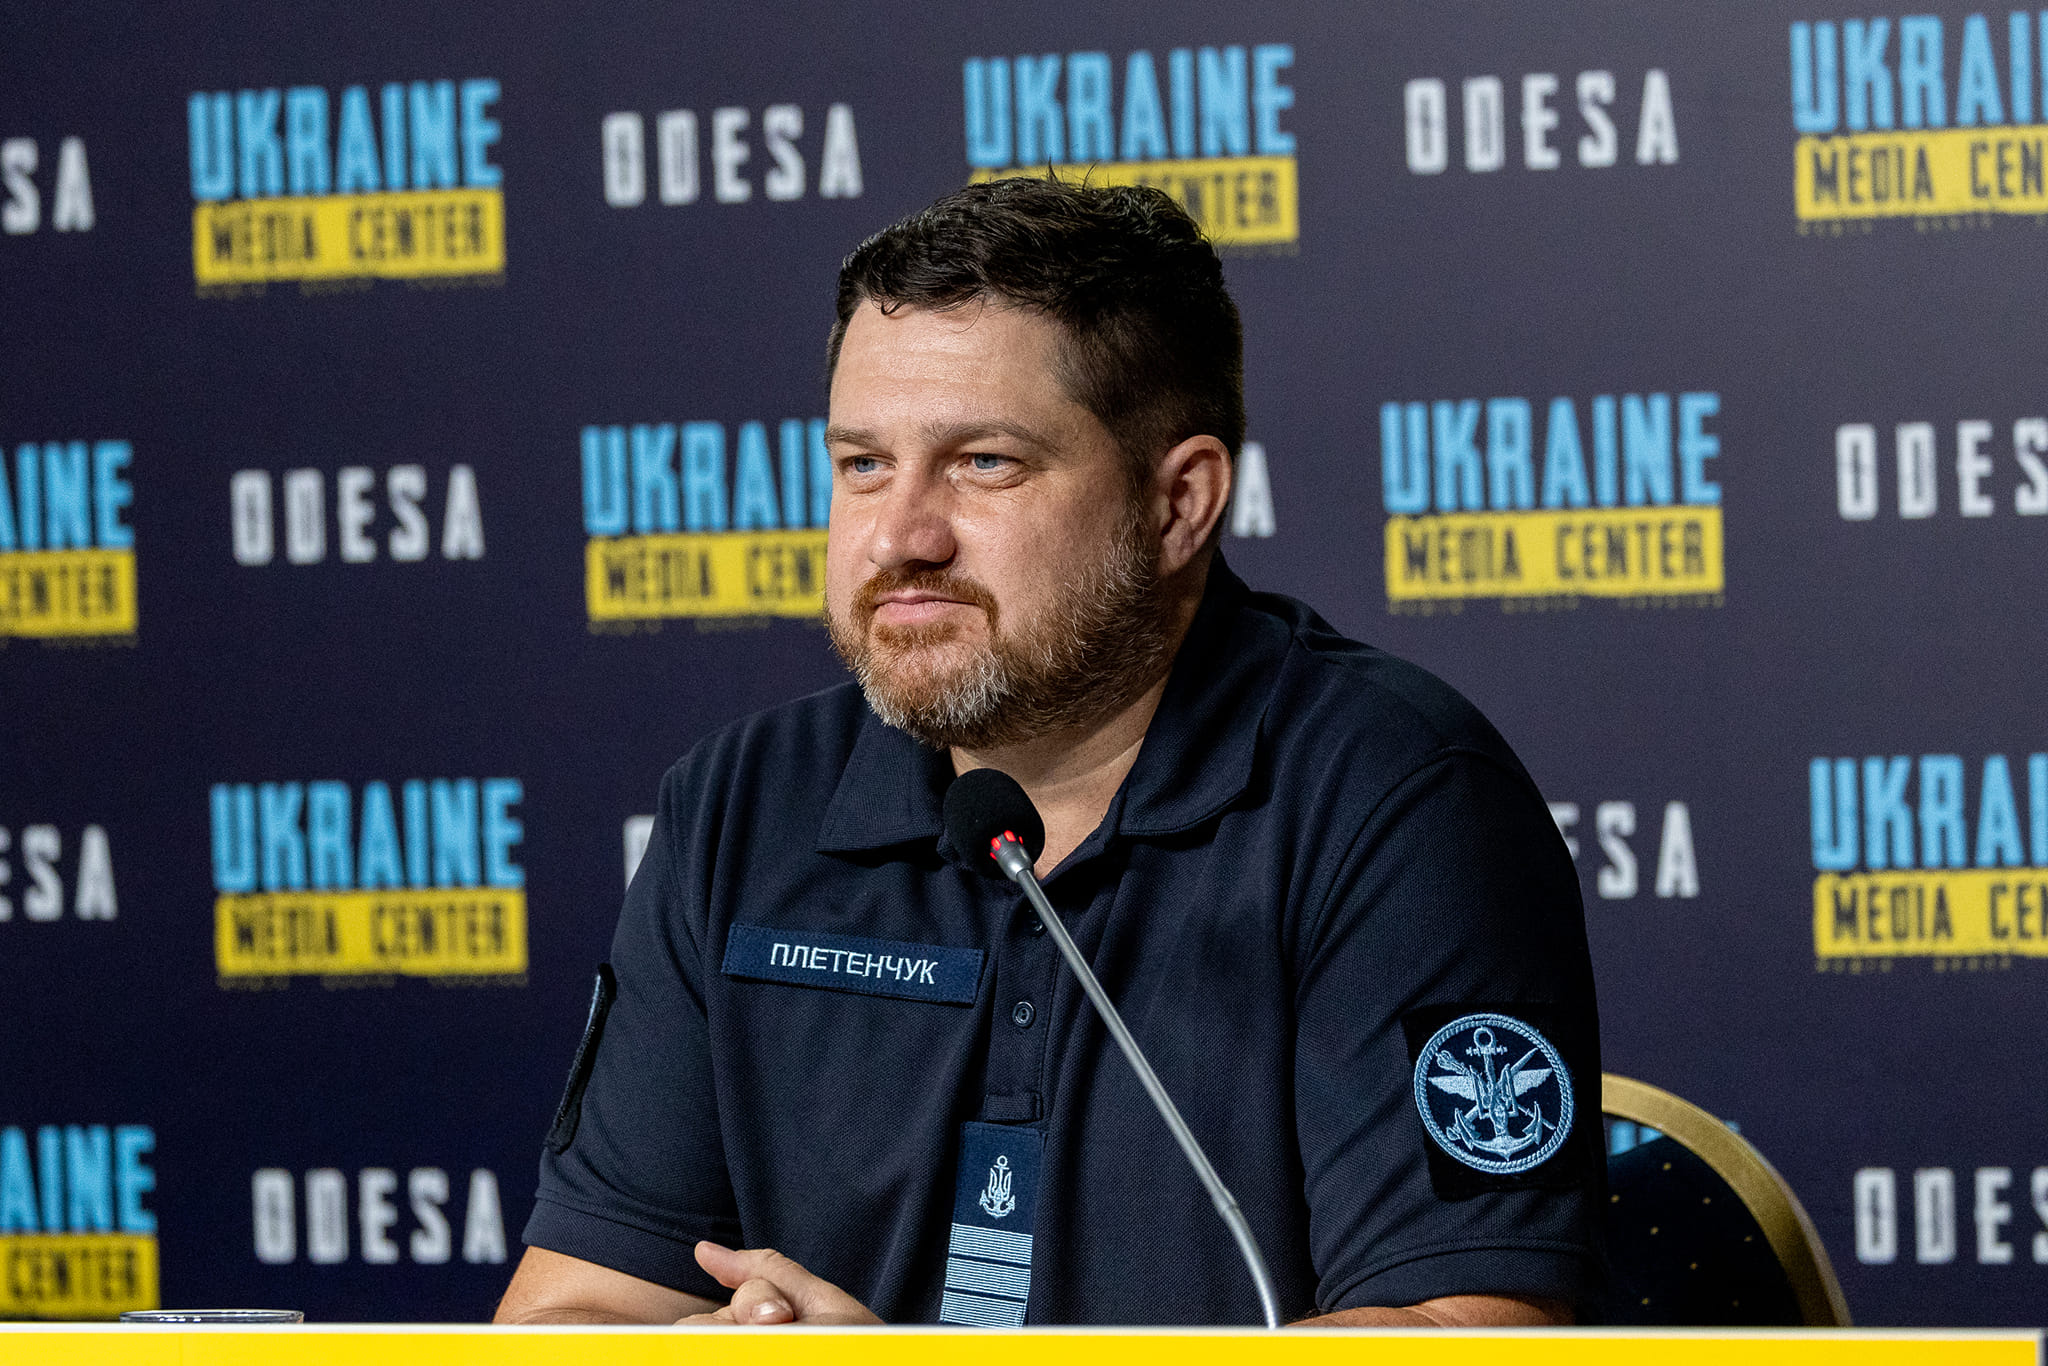 Dmytro Pletenchuk: In the Black Sea, there could be around 400 mines and an explosive device washed away from the Kakhovka Hydroelectric Station